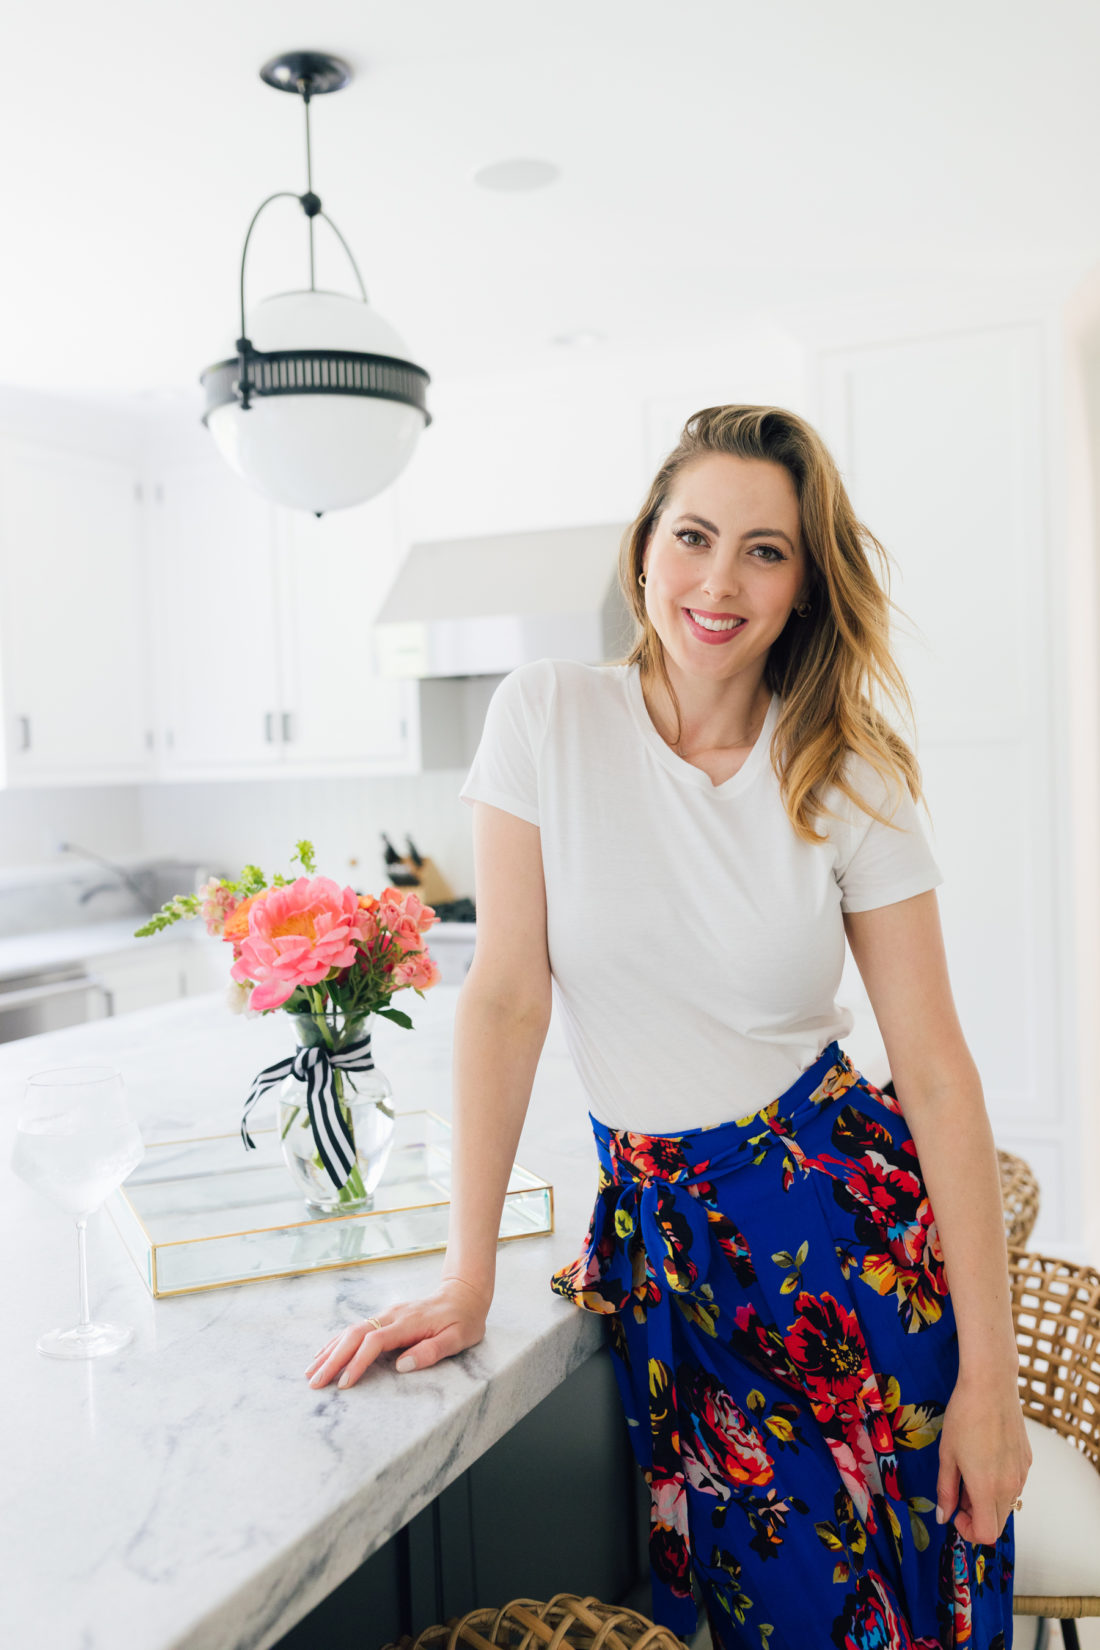 Eva Amurri Martino wears a crisp white t-shirt and a colorful skirt in her kitchen in Connecticut